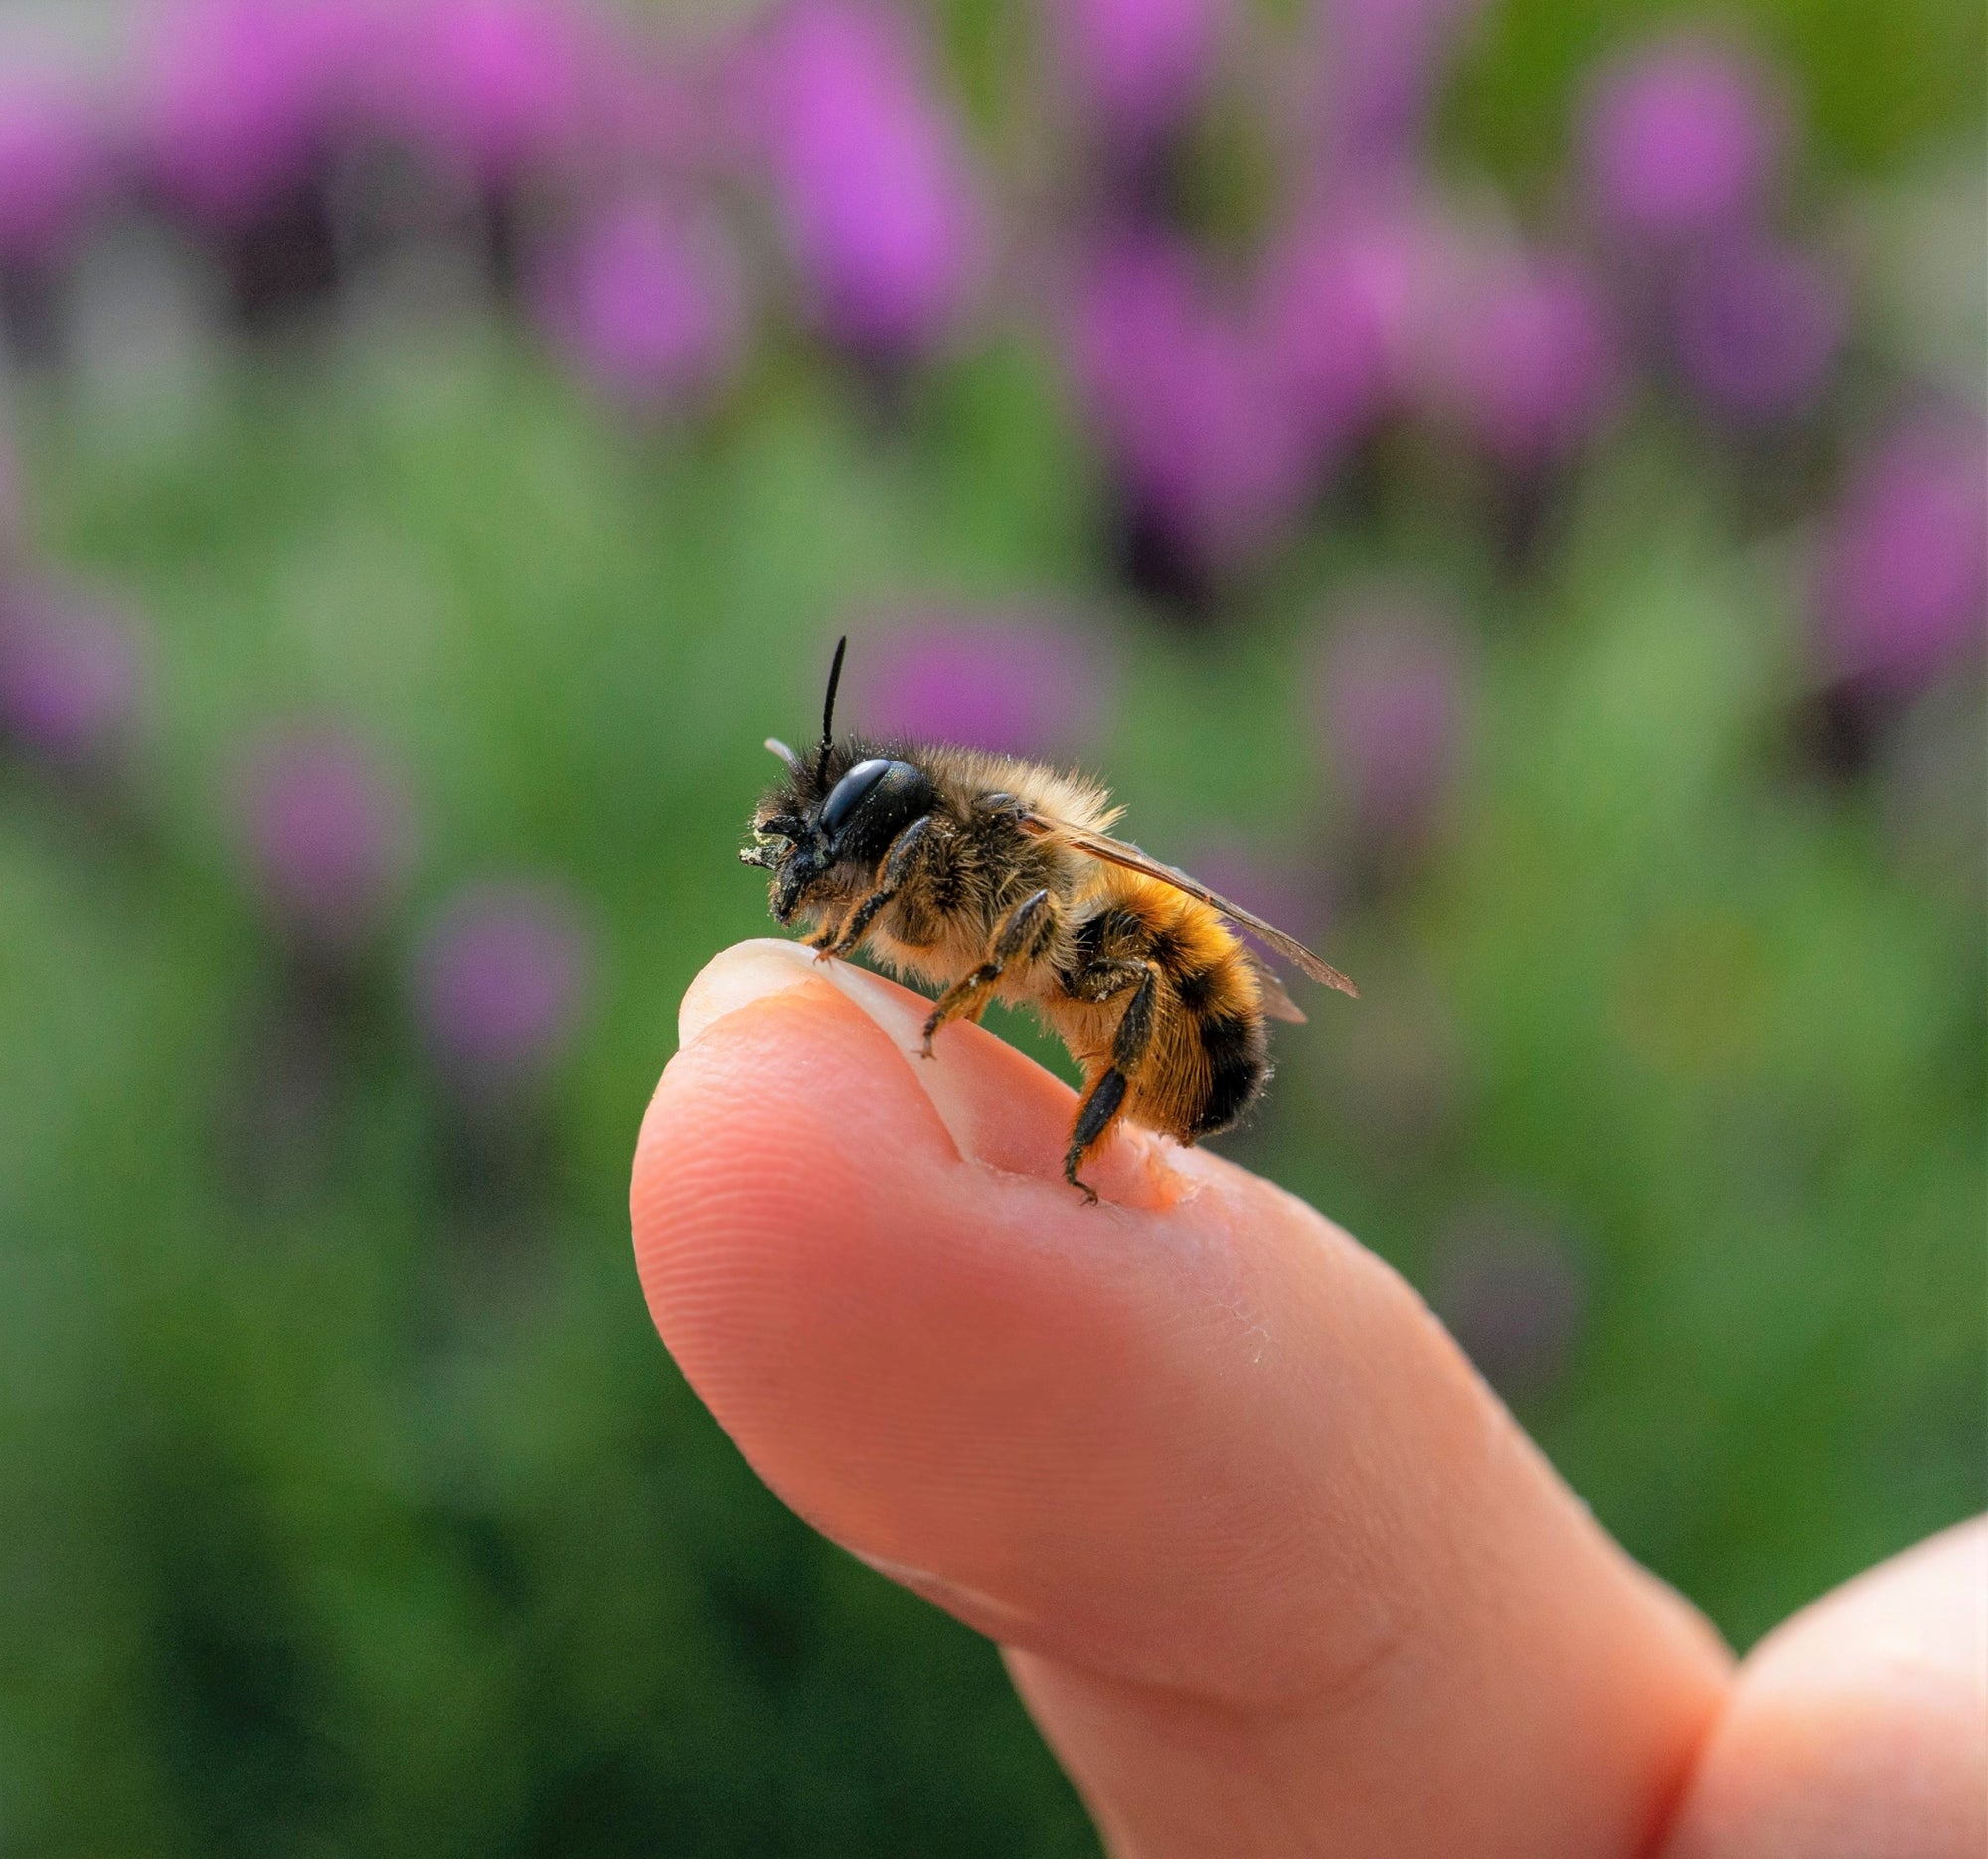 5 steps to treat your child's bee sting